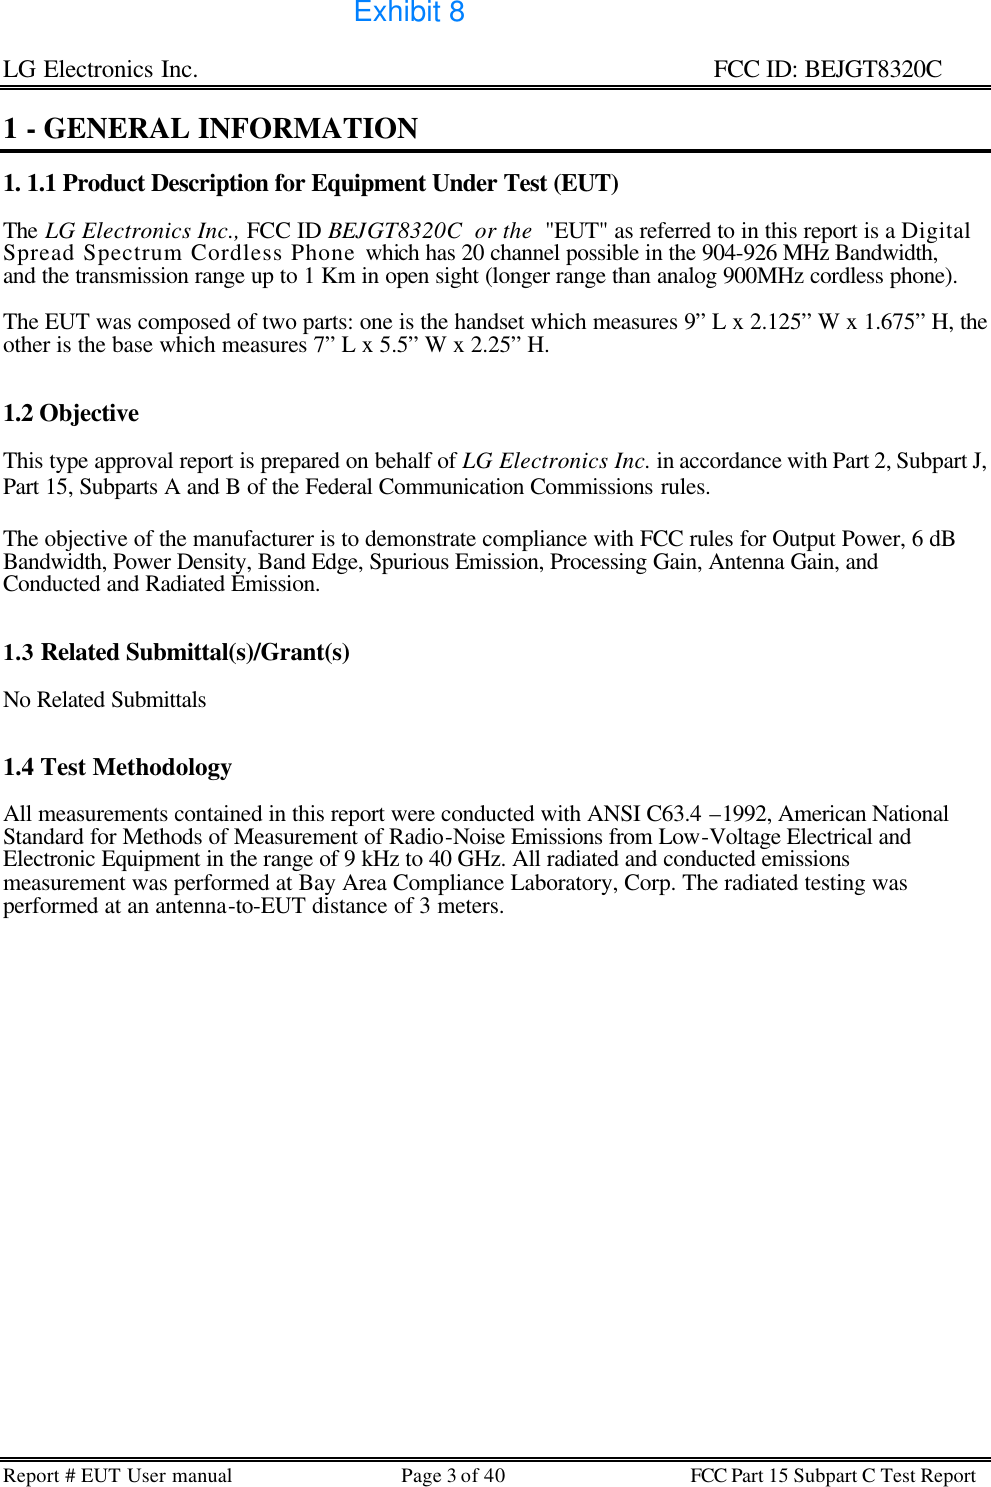 LG Electronics Inc.                                                                                                   FCC ID: BEJGT8320C Report # EUT User manual Page 3 of 40 FCC Part 15 Subpart C Test Report   1 - GENERAL INFORMATION  1. 1.1 Product Description for Equipment Under Test (EUT)  The LG Electronics Inc., FCC ID BEJGT8320C  or the  &quot;EUT&quot; as referred to in this report is a Digital Spread Spectrum Cordless Phone which has 20 channel possible in the 904-926 MHz Bandwidth, and the transmission range up to 1 Km in open sight (longer range than analog 900MHz cordless phone).   The EUT was composed of two parts: one is the handset which measures 9” L x 2.125” W x 1.675” H, the other is the base which measures 7” L x 5.5” W x 2.25” H.   1.2 Objective  This type approval report is prepared on behalf of LG Electronics Inc. in accordance with Part 2, Subpart J, Part 15, Subparts A and B of the Federal Communication Commissions rules.  The objective of the manufacturer is to demonstrate compliance with FCC rules for Output Power, 6 dB Bandwidth, Power Density, Band Edge, Spurious Emission, Processing Gain, Antenna Gain, and Conducted and Radiated Emission.   1.3 Related Submittal(s)/Grant(s)  No Related Submittals   1.4 Test Methodology  All measurements contained in this report were conducted with ANSI C63.4 –1992, American National Standard for Methods of Measurement of Radio-Noise Emissions from Low-Voltage Electrical and Electronic Equipment in the range of 9 kHz to 40 GHz. All radiated and conducted emissions measurement was performed at Bay Area Compliance Laboratory, Corp. The radiated testing was performed at an antenna-to-EUT distance of 3 meters.  Exhibit 8